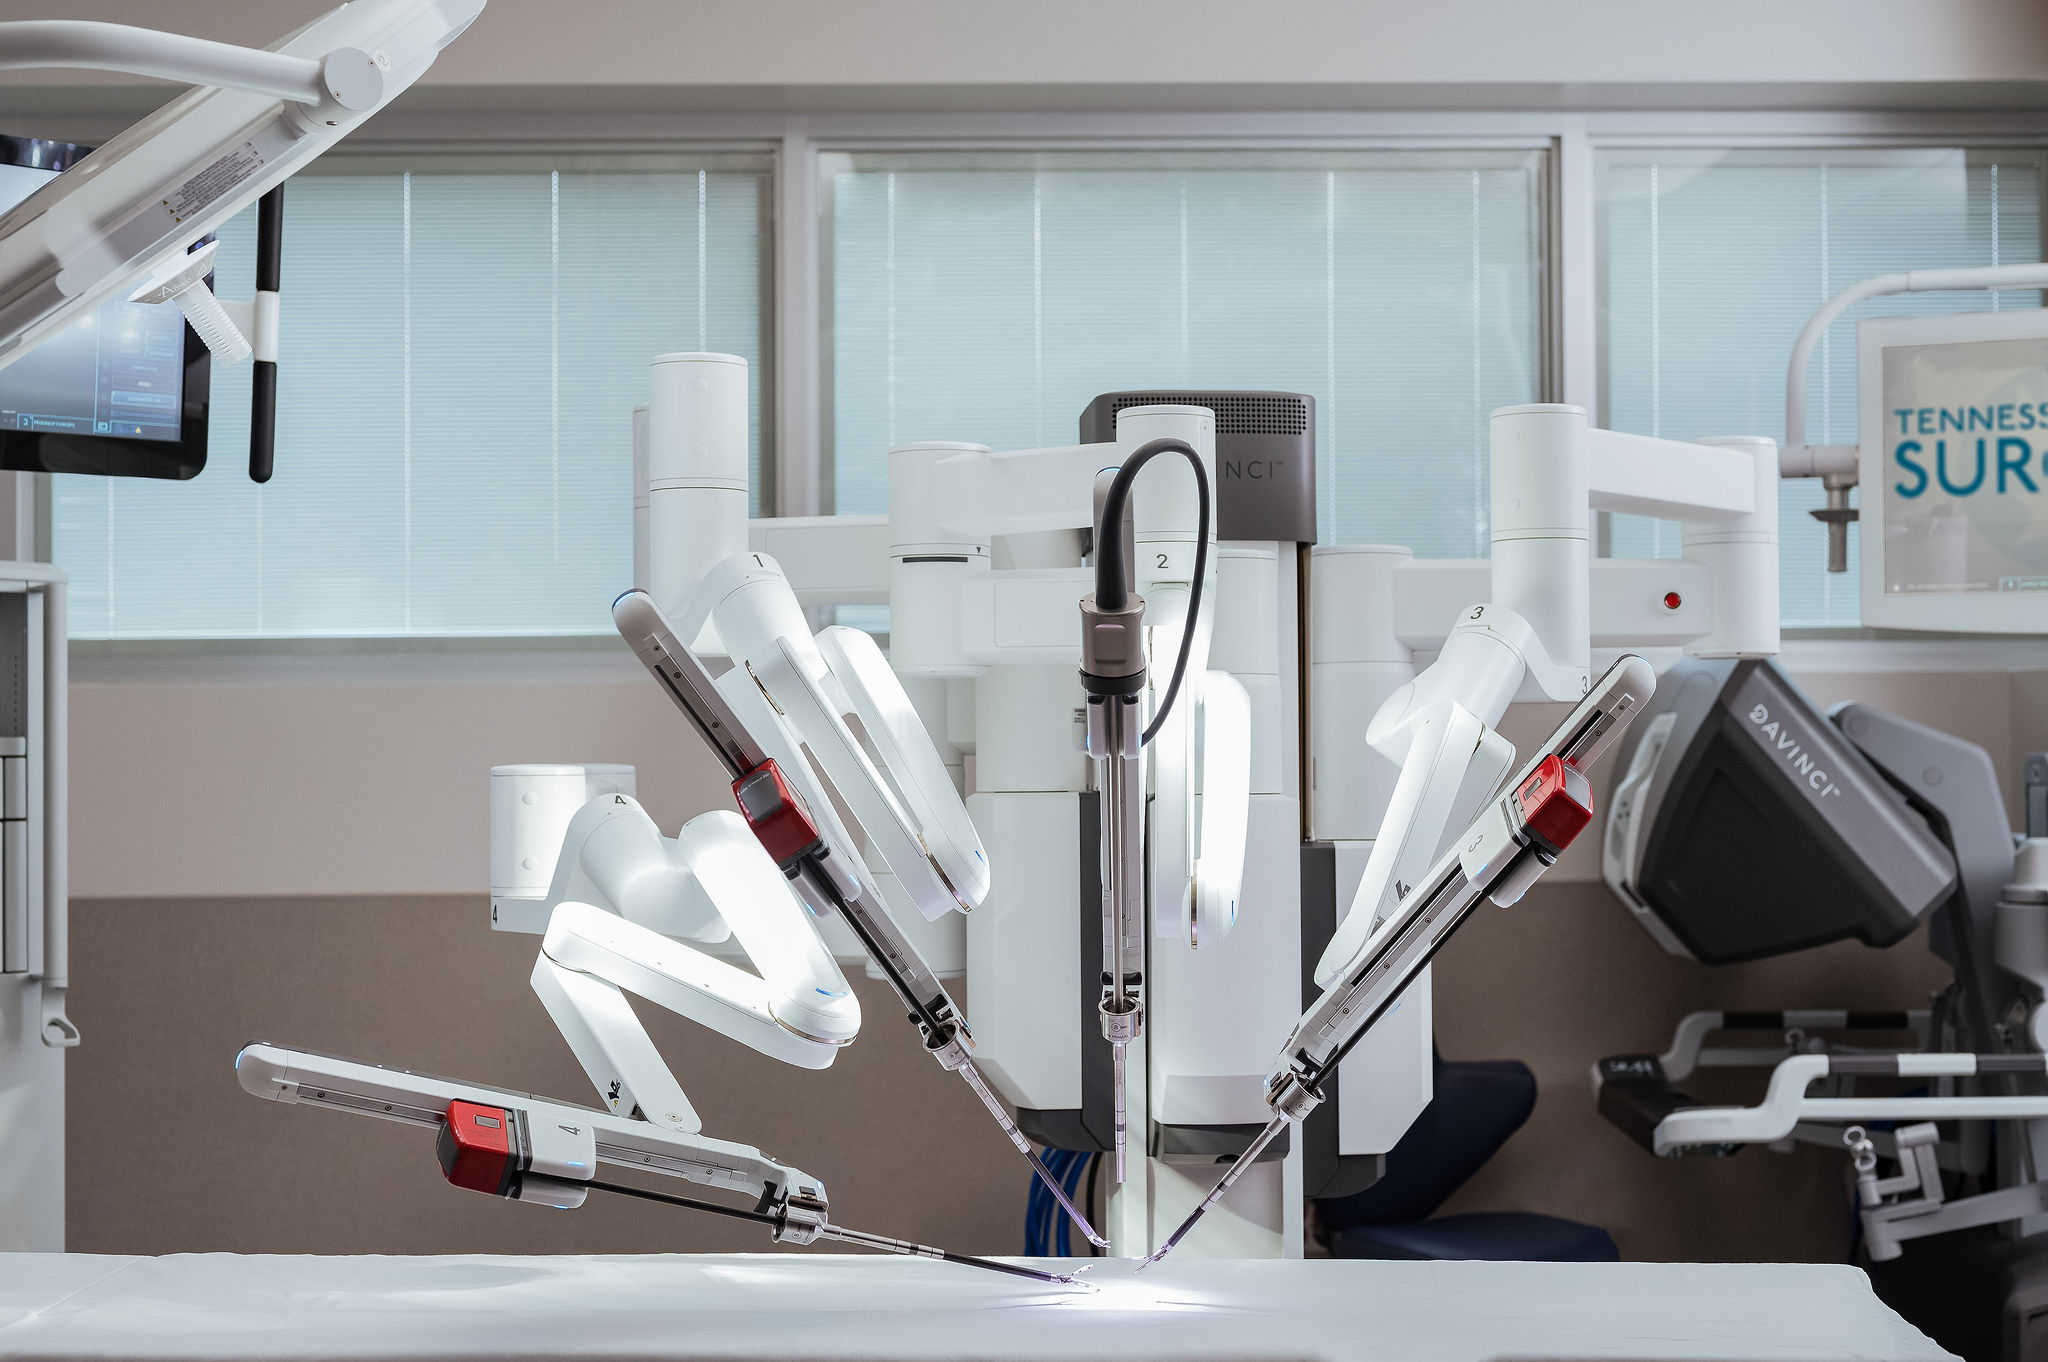 An example picture of an empty surgery room with the davinci surgical robot device in the operating room.